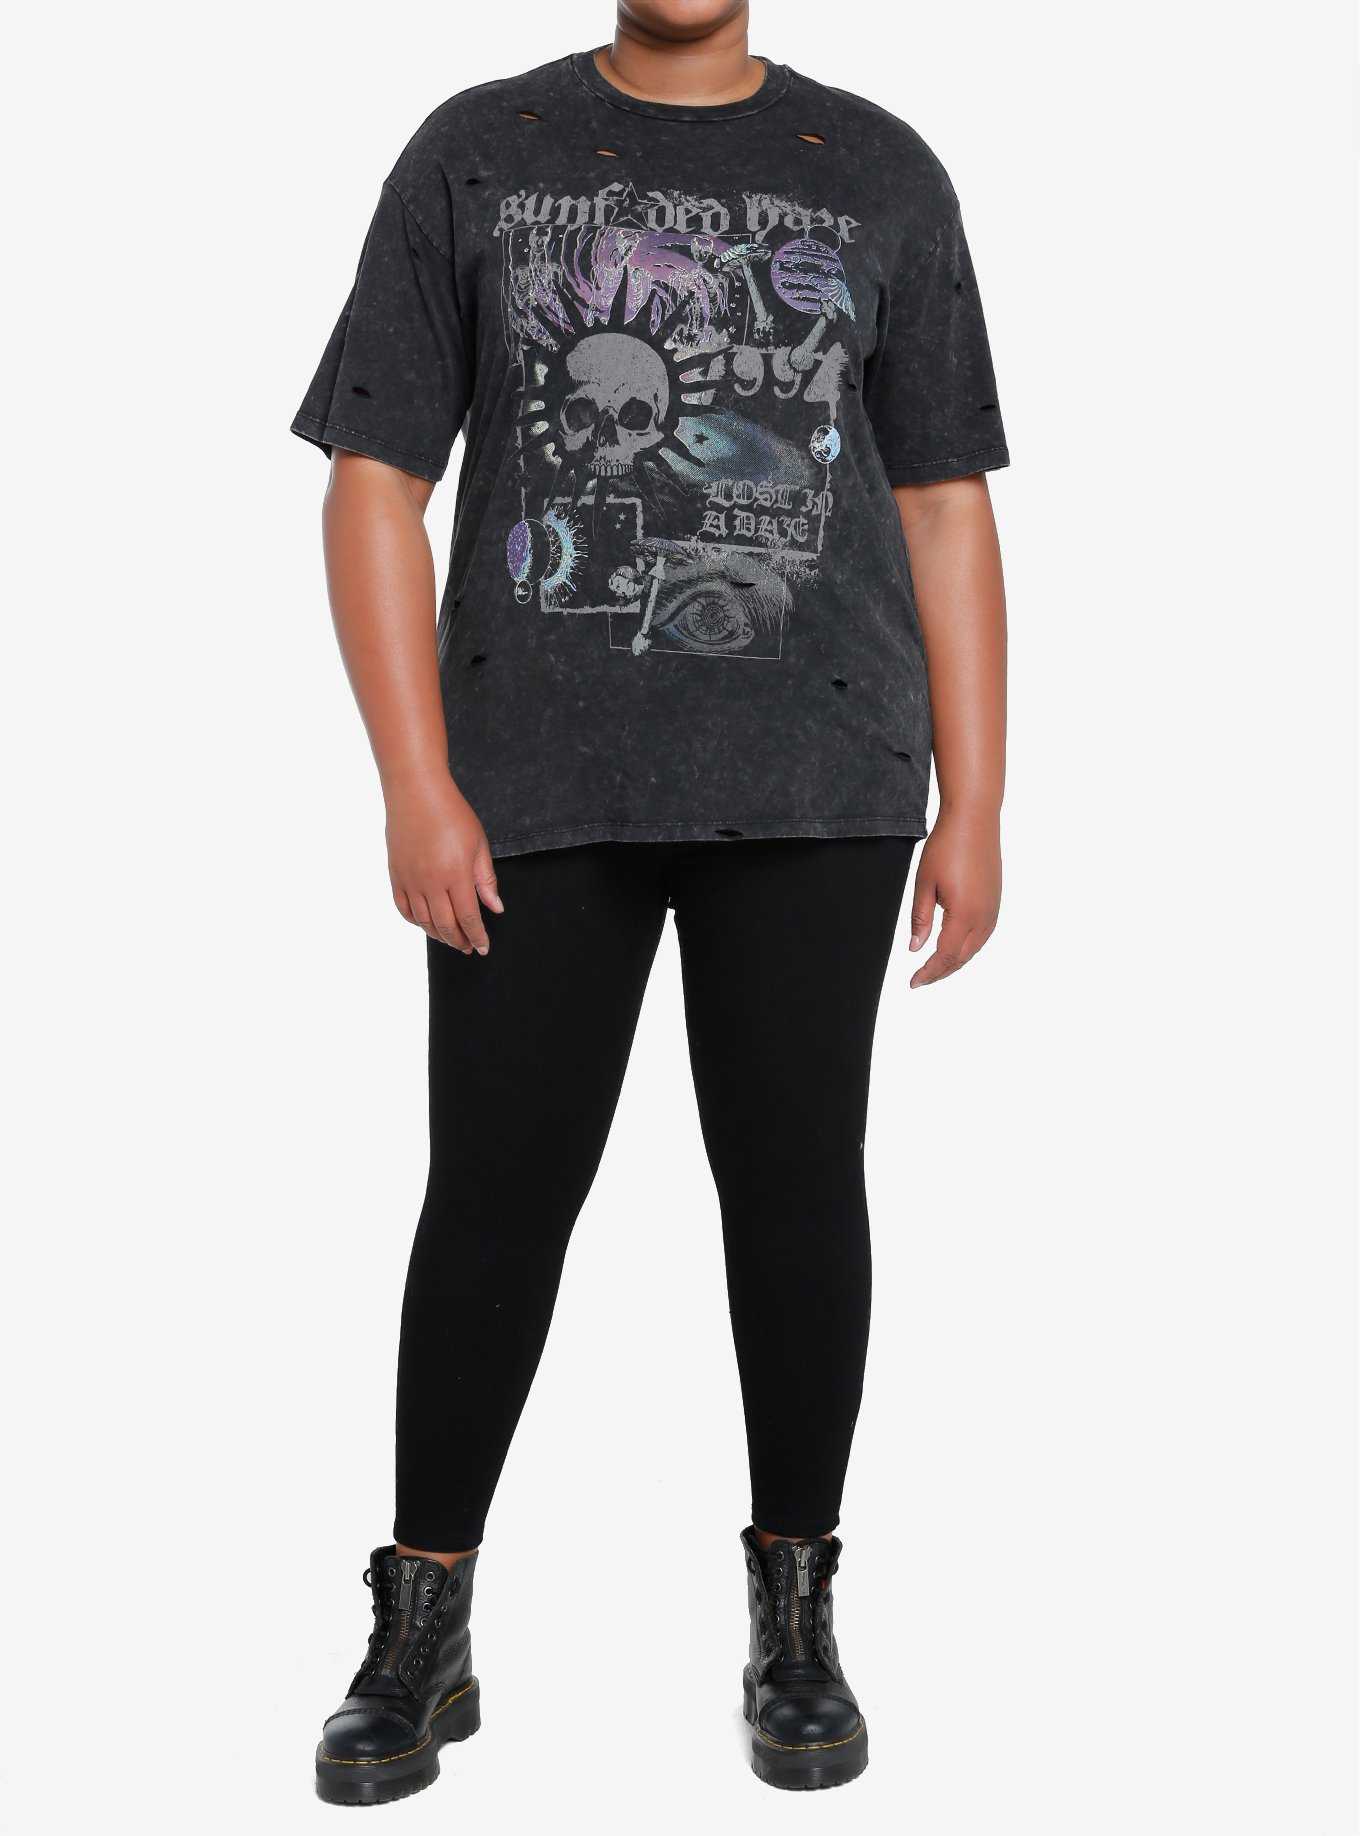 Social Collision Skull Collage Distressed Girls T-Shirt Plus Size, , hi-res